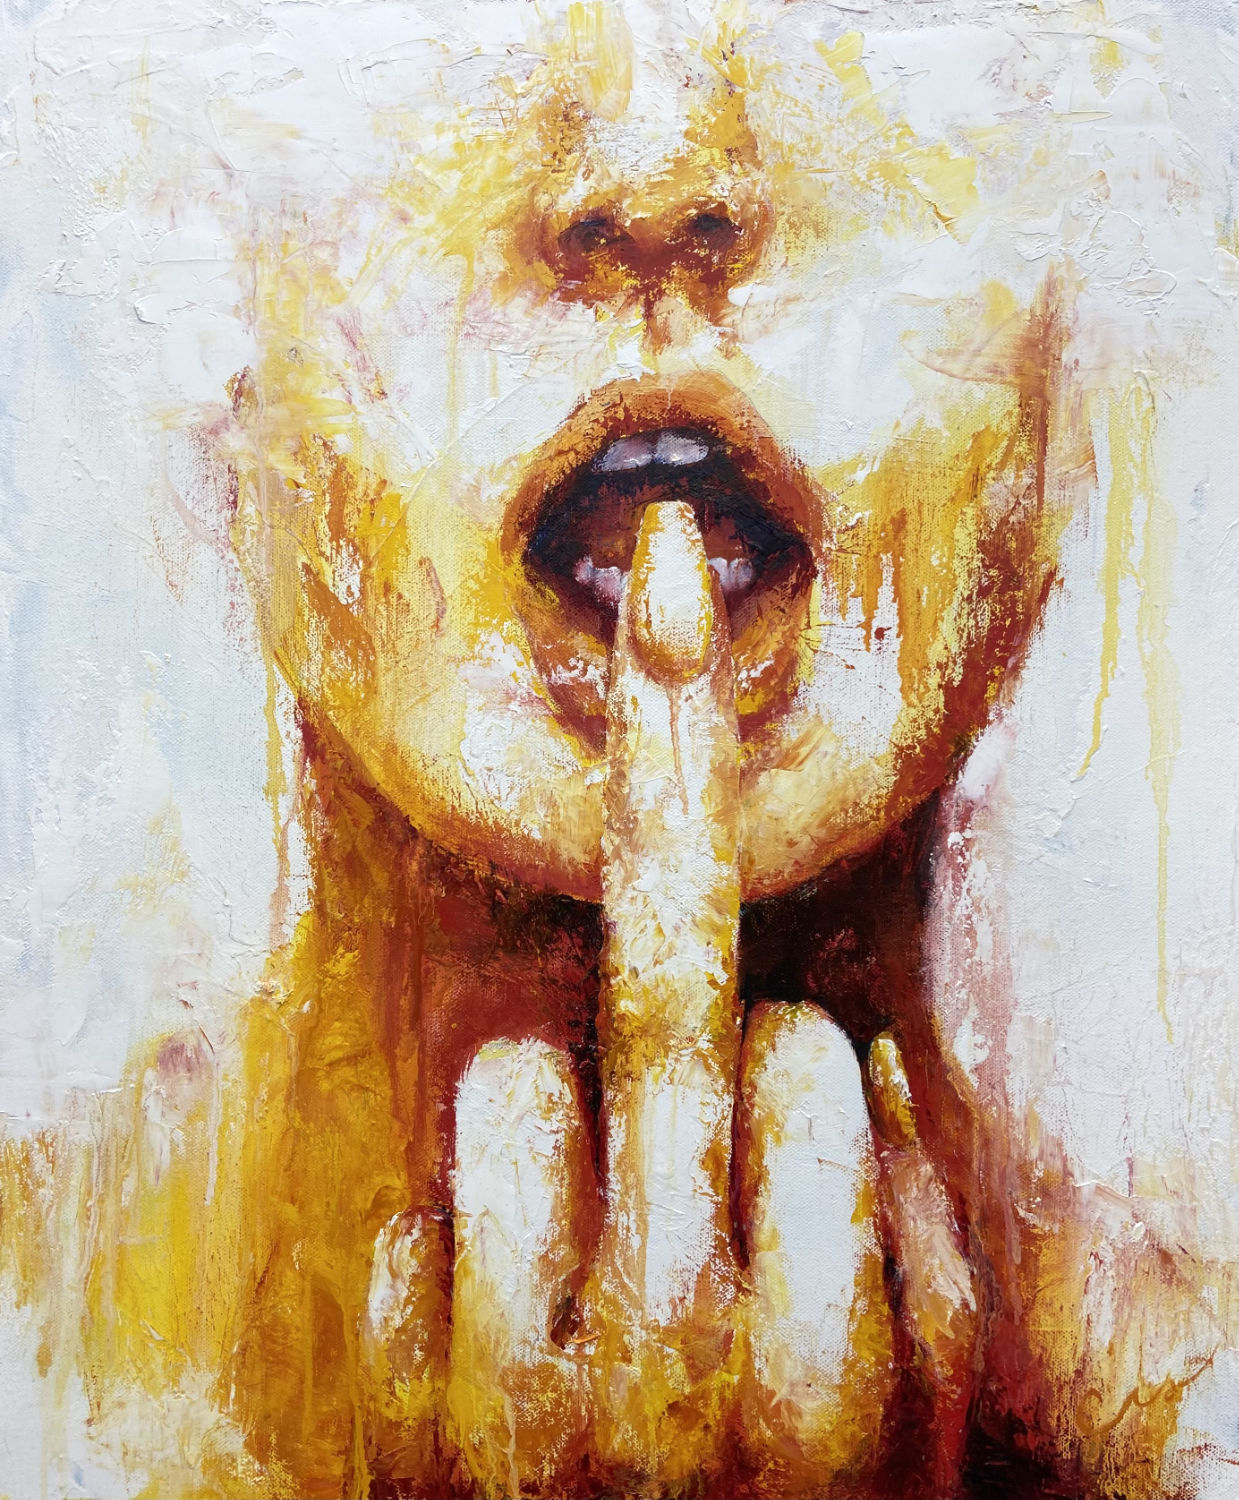 original oil painting and mixed media by cassidy austin studios. orange pop-art textured contemporary womans portrait with middle finger. Titled: I Am The Revolution